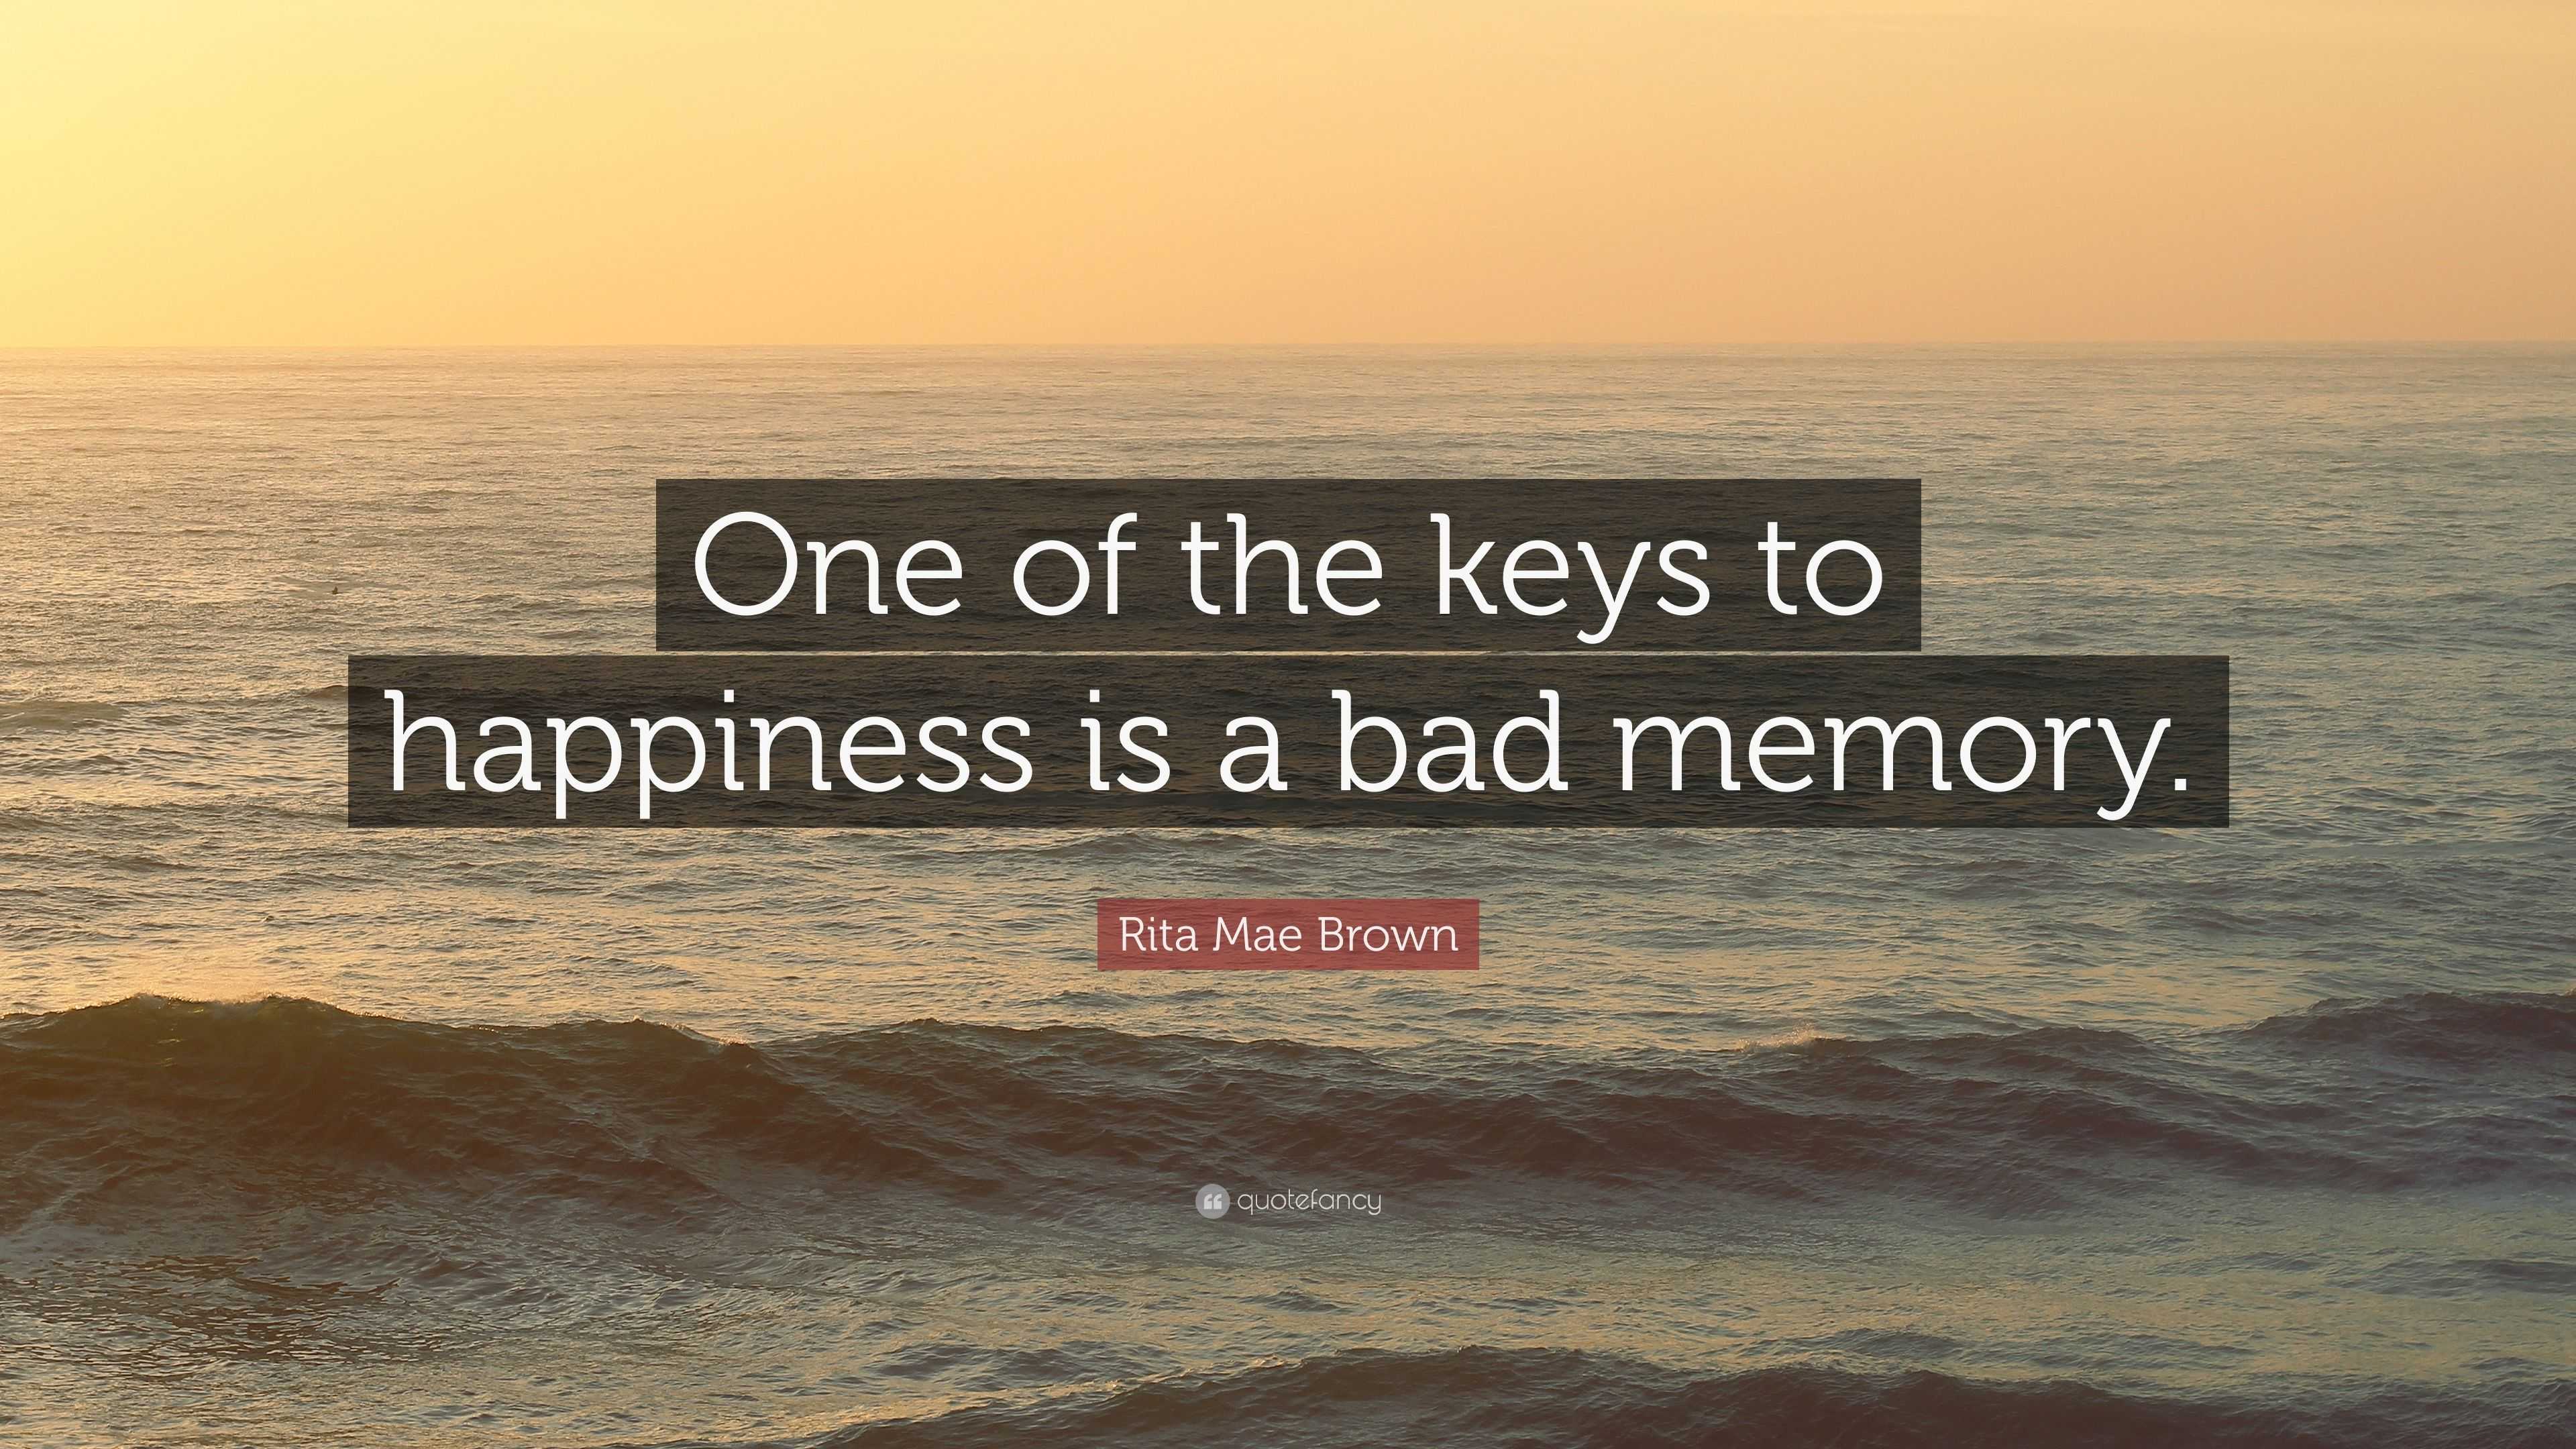 Rita Mae Brown Quote: “One of the keys to happiness is a bad memory.”